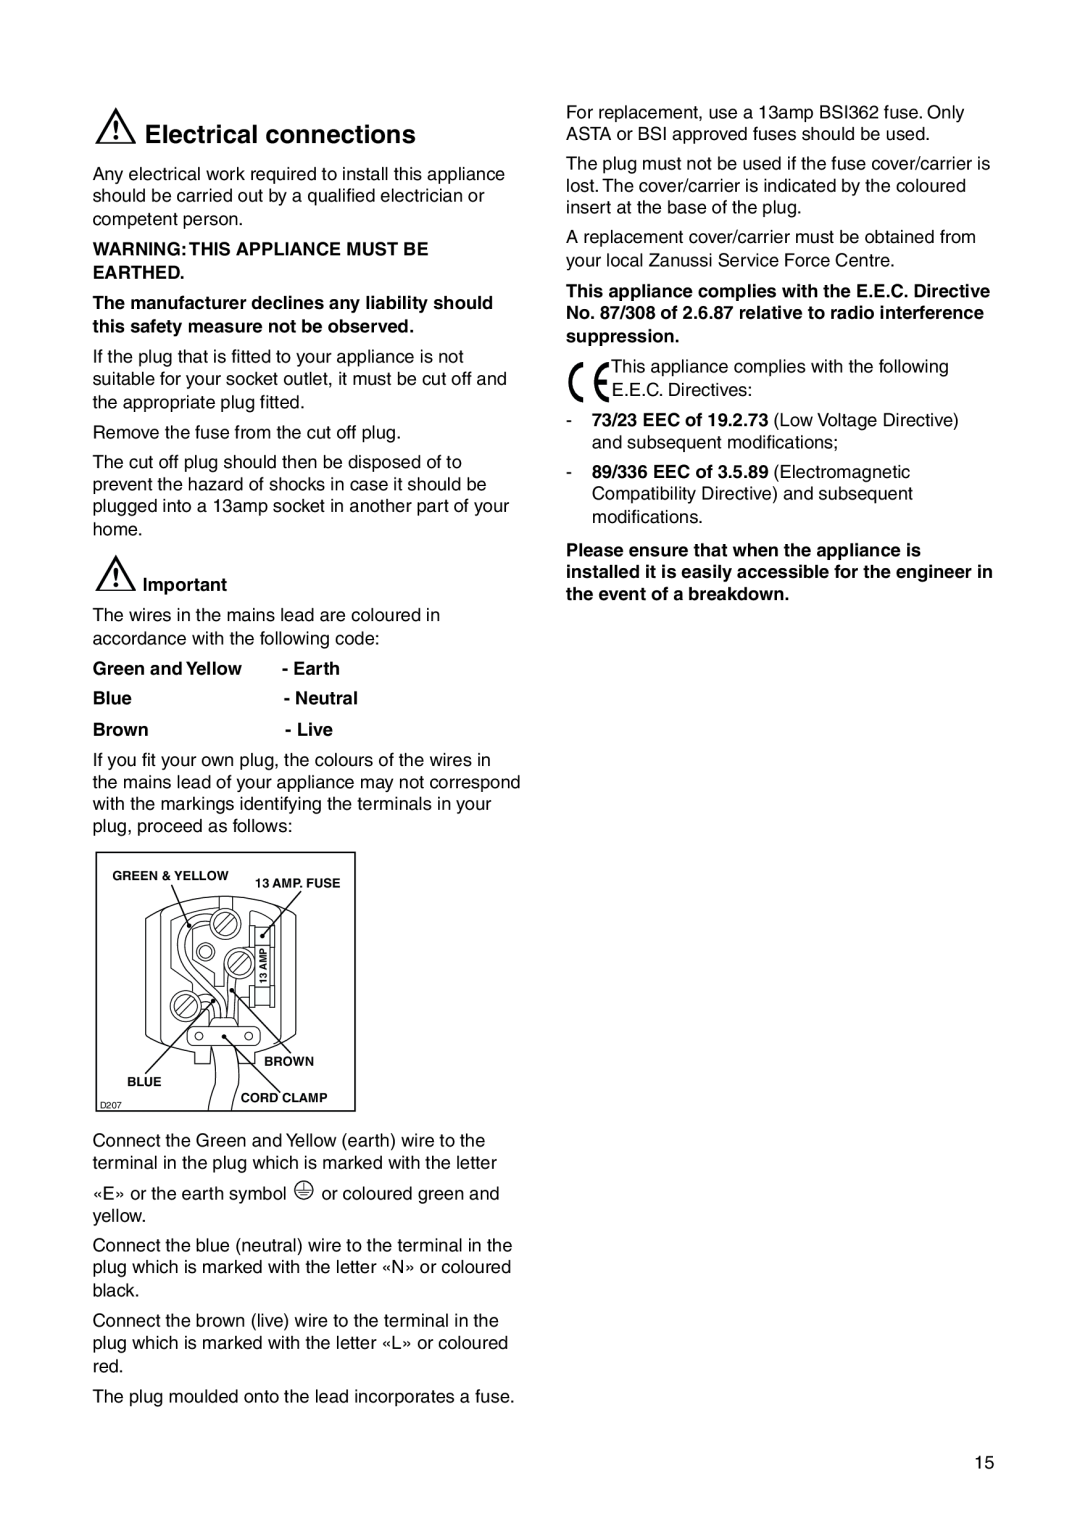 Zanussi ZI 918/12 KA manual Electrical connections, Warning This Appliance Must Be Earthed, Green and Yellow 